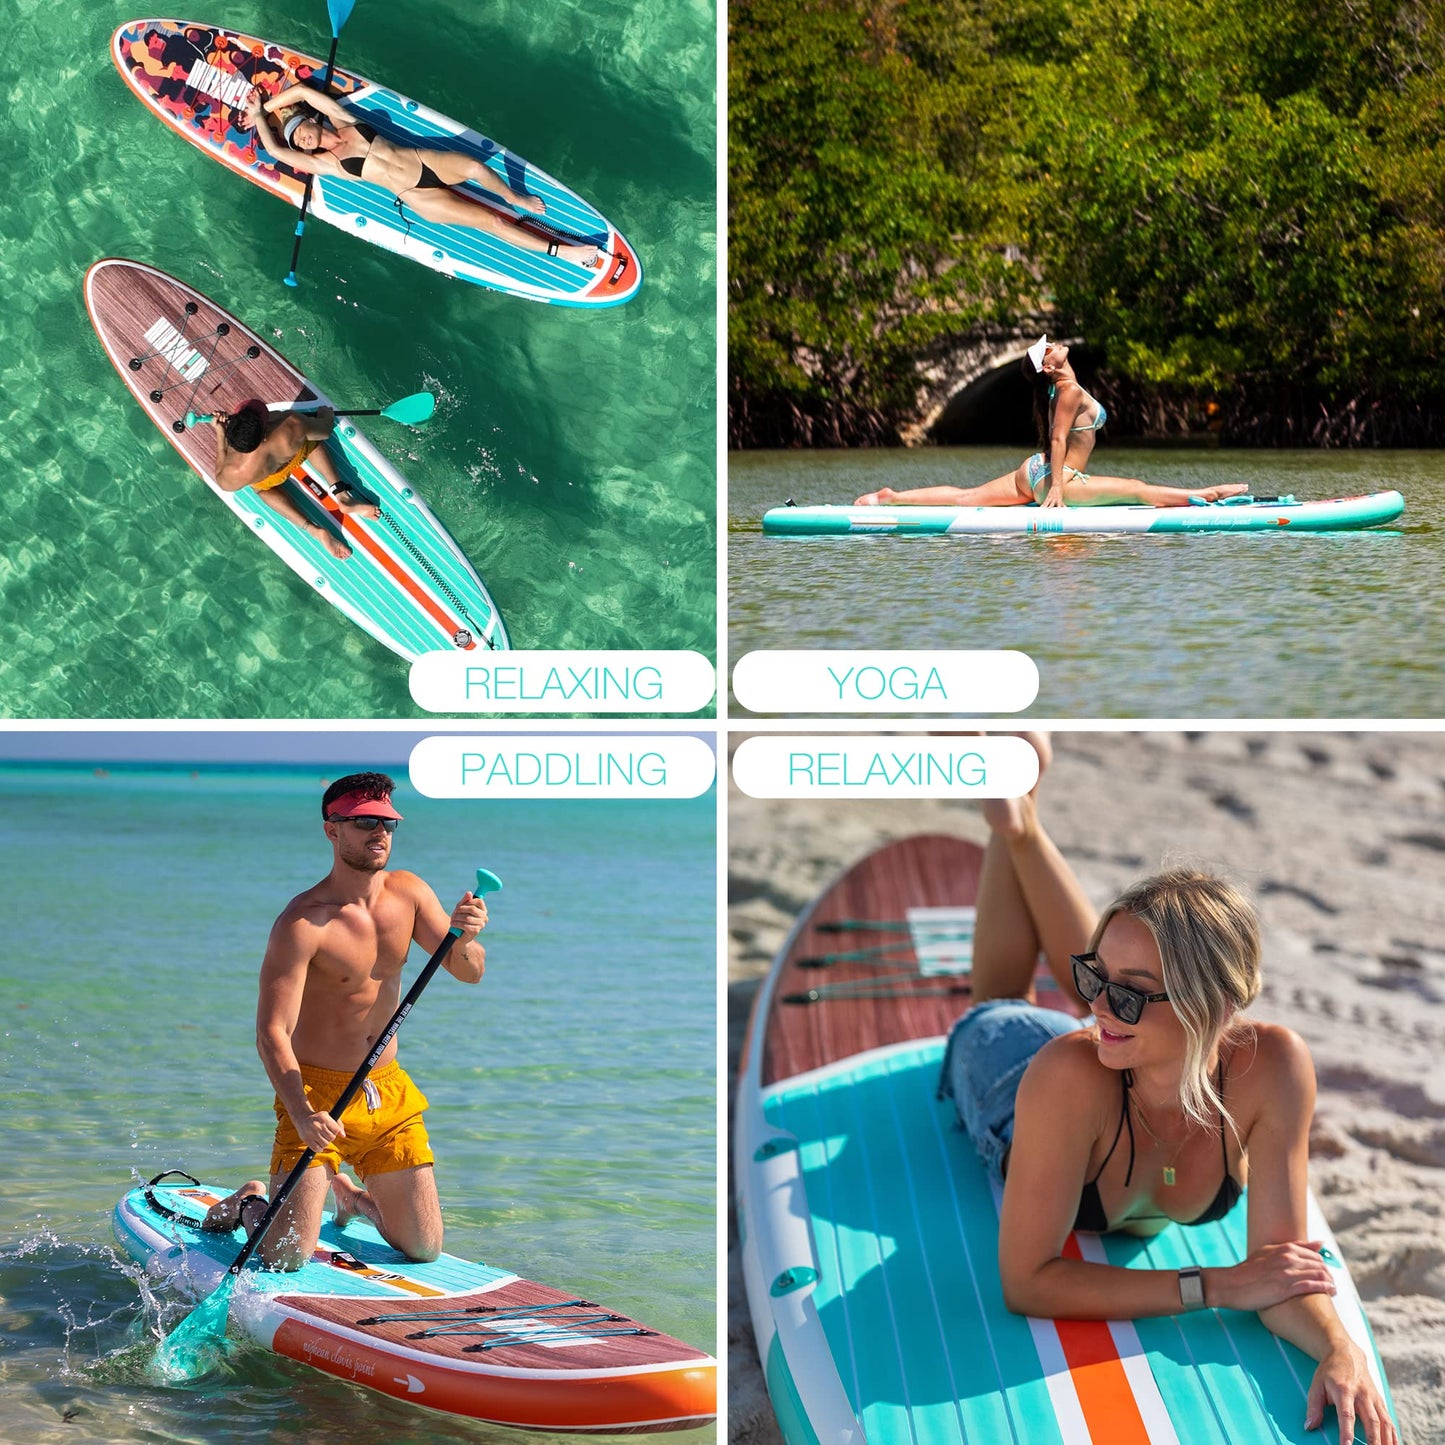 Niphean Inflatable Stand Up Paddle Board with SUP Accessories, Anti-Slip EVA Deck, 10’6’’ Inflatable Paddle Boards for Adults & Youth of All Skill Levels